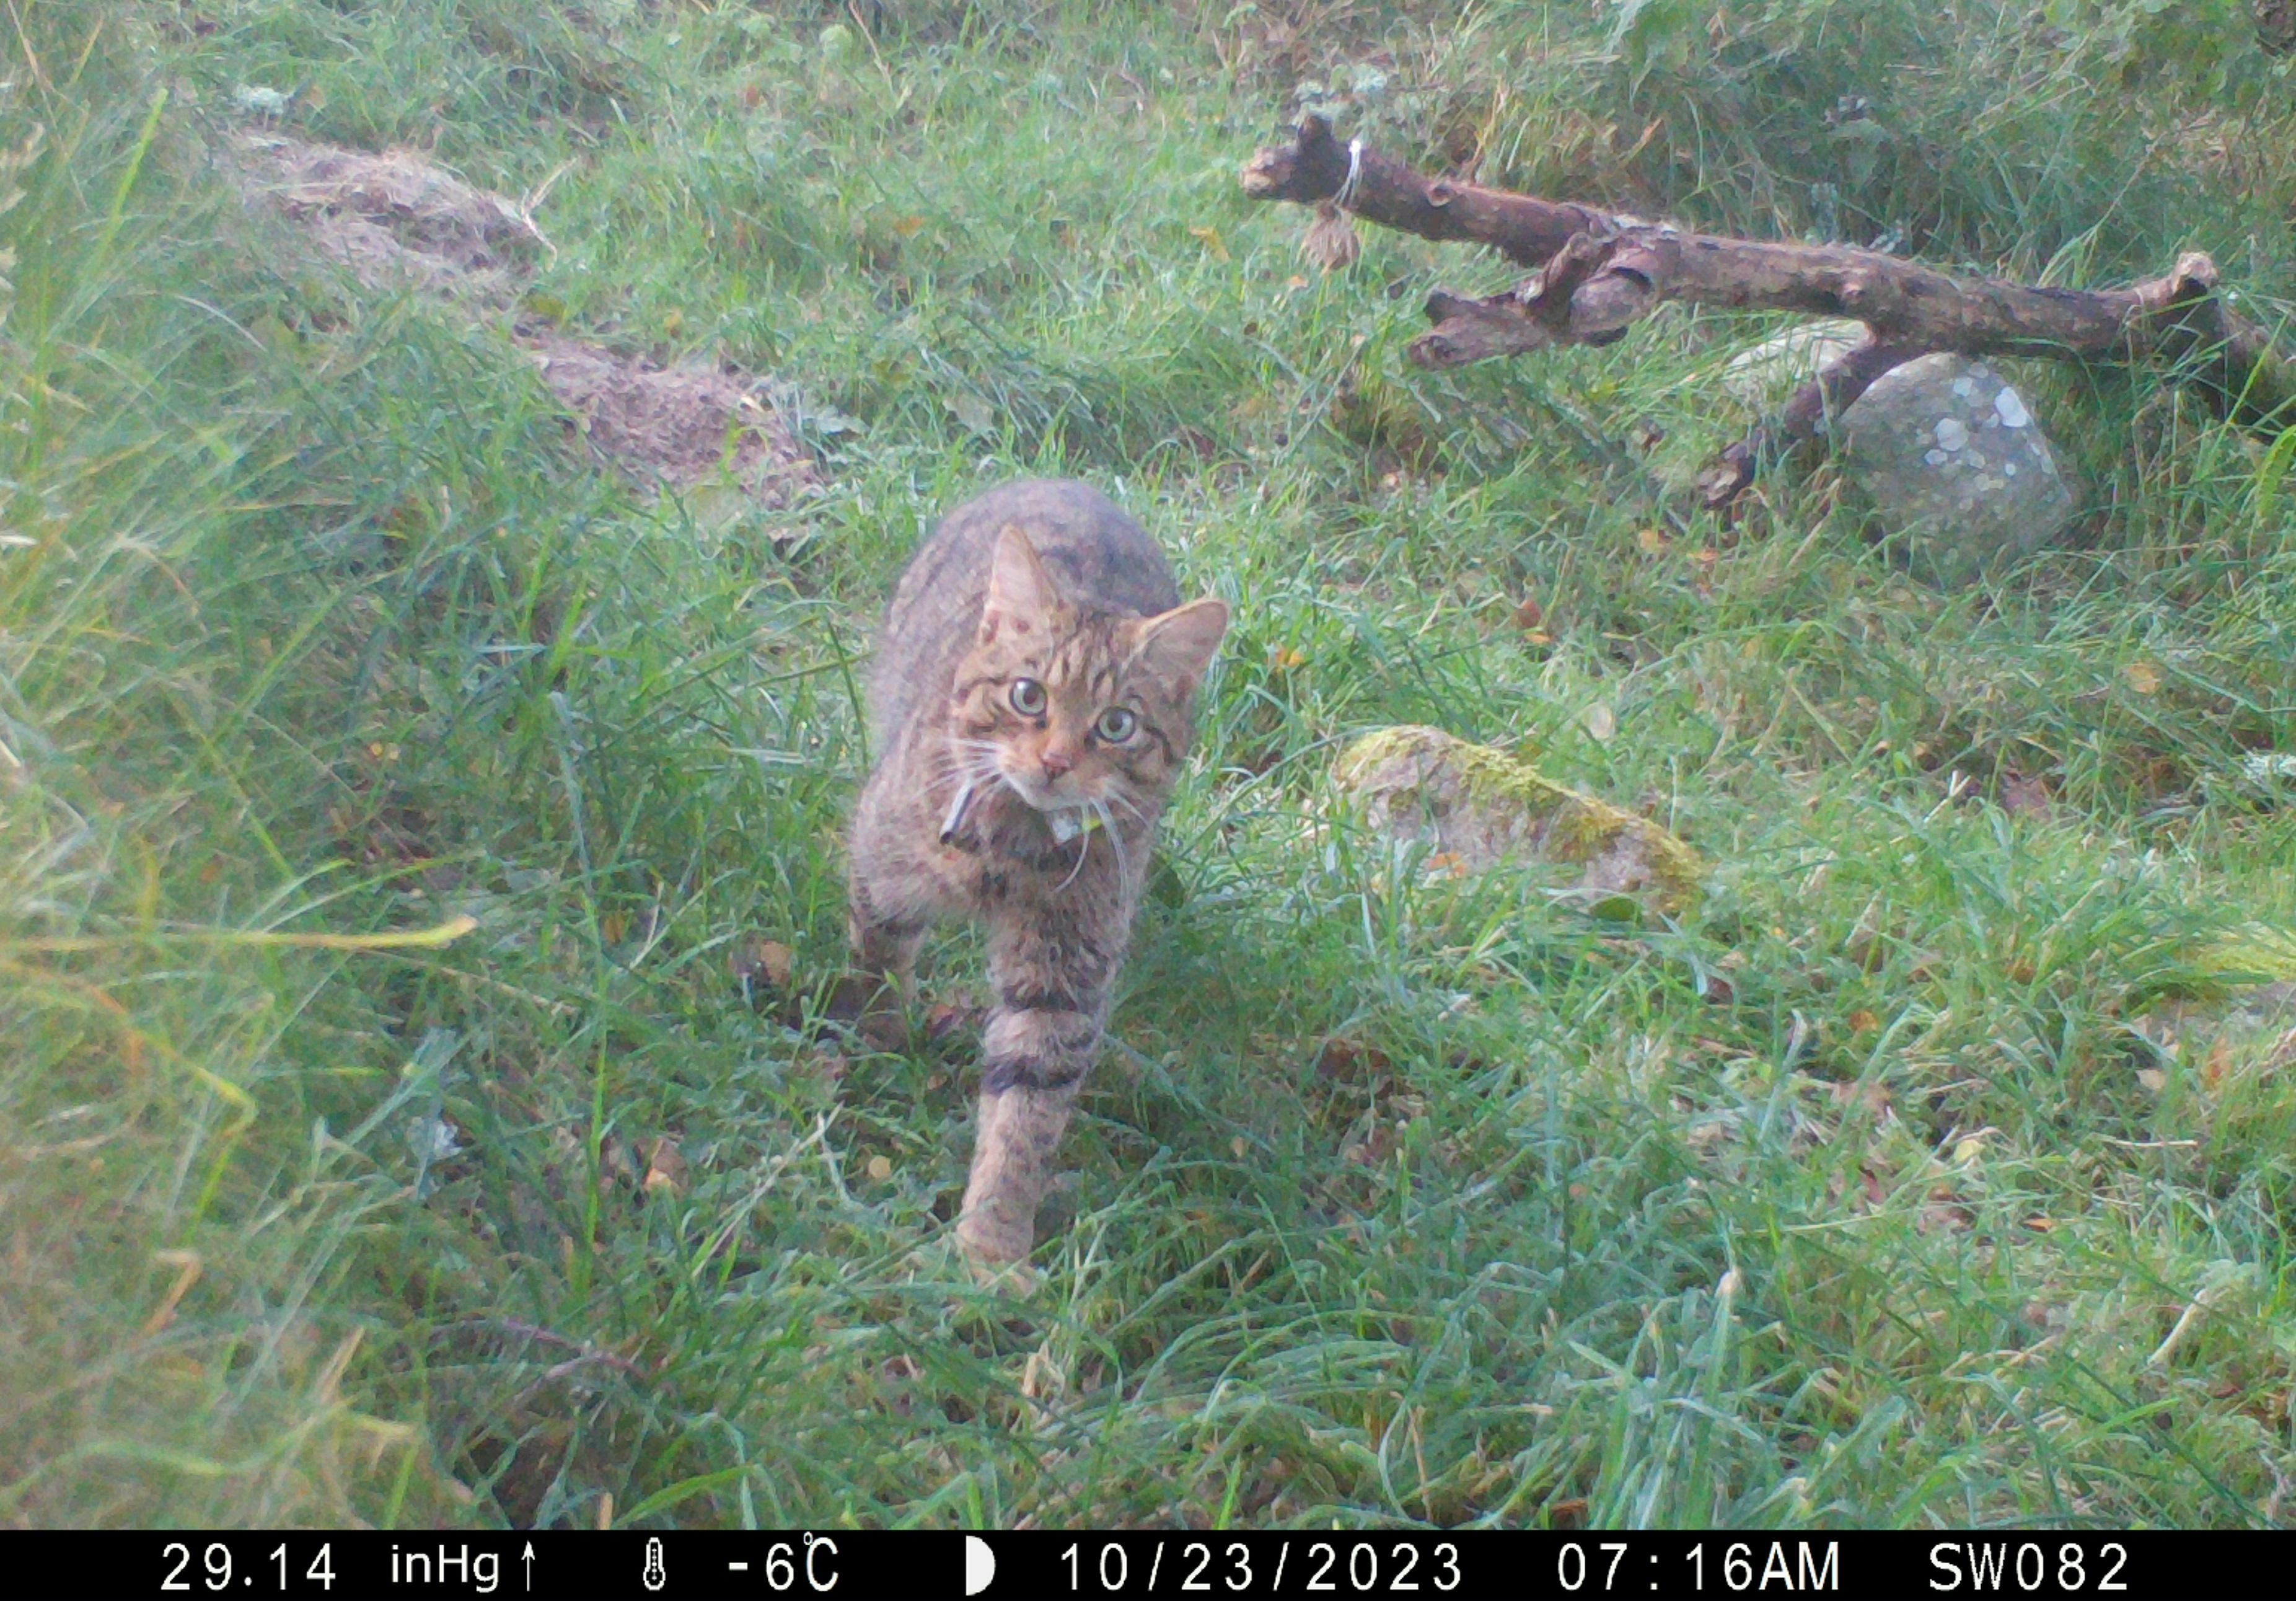 A female wildcat is a field looking into camera with date and timestamp